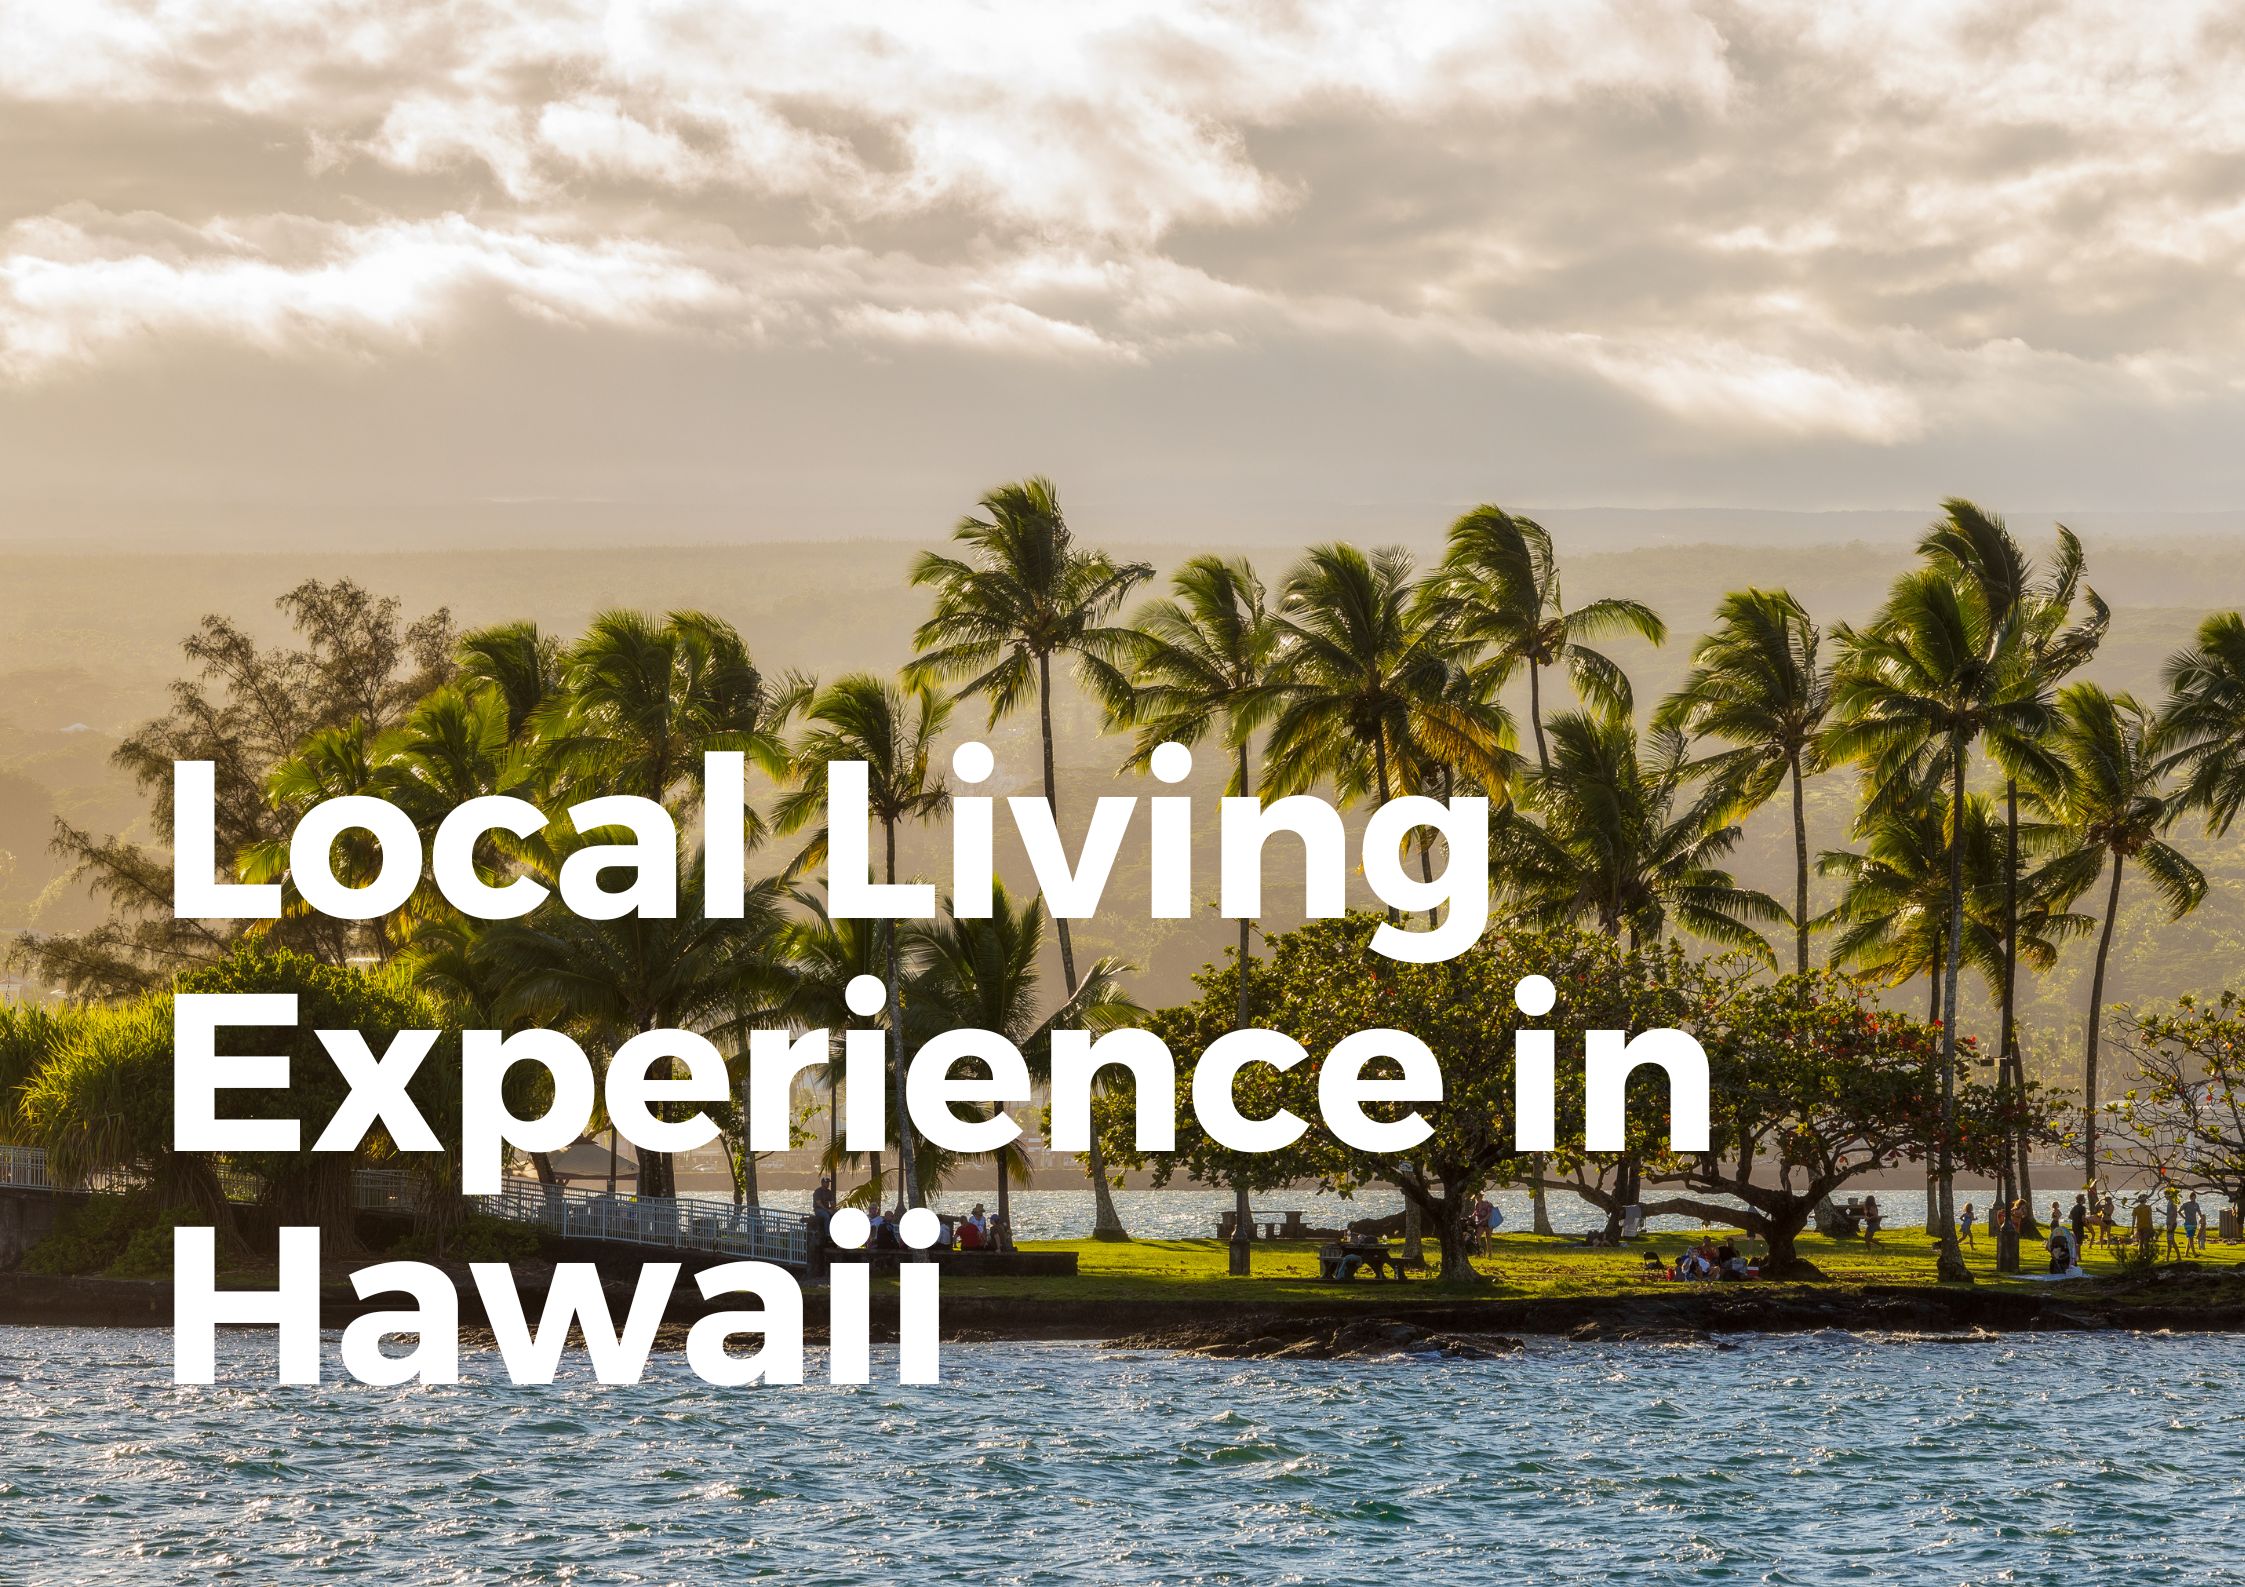 Local Living Experience in Hawaii